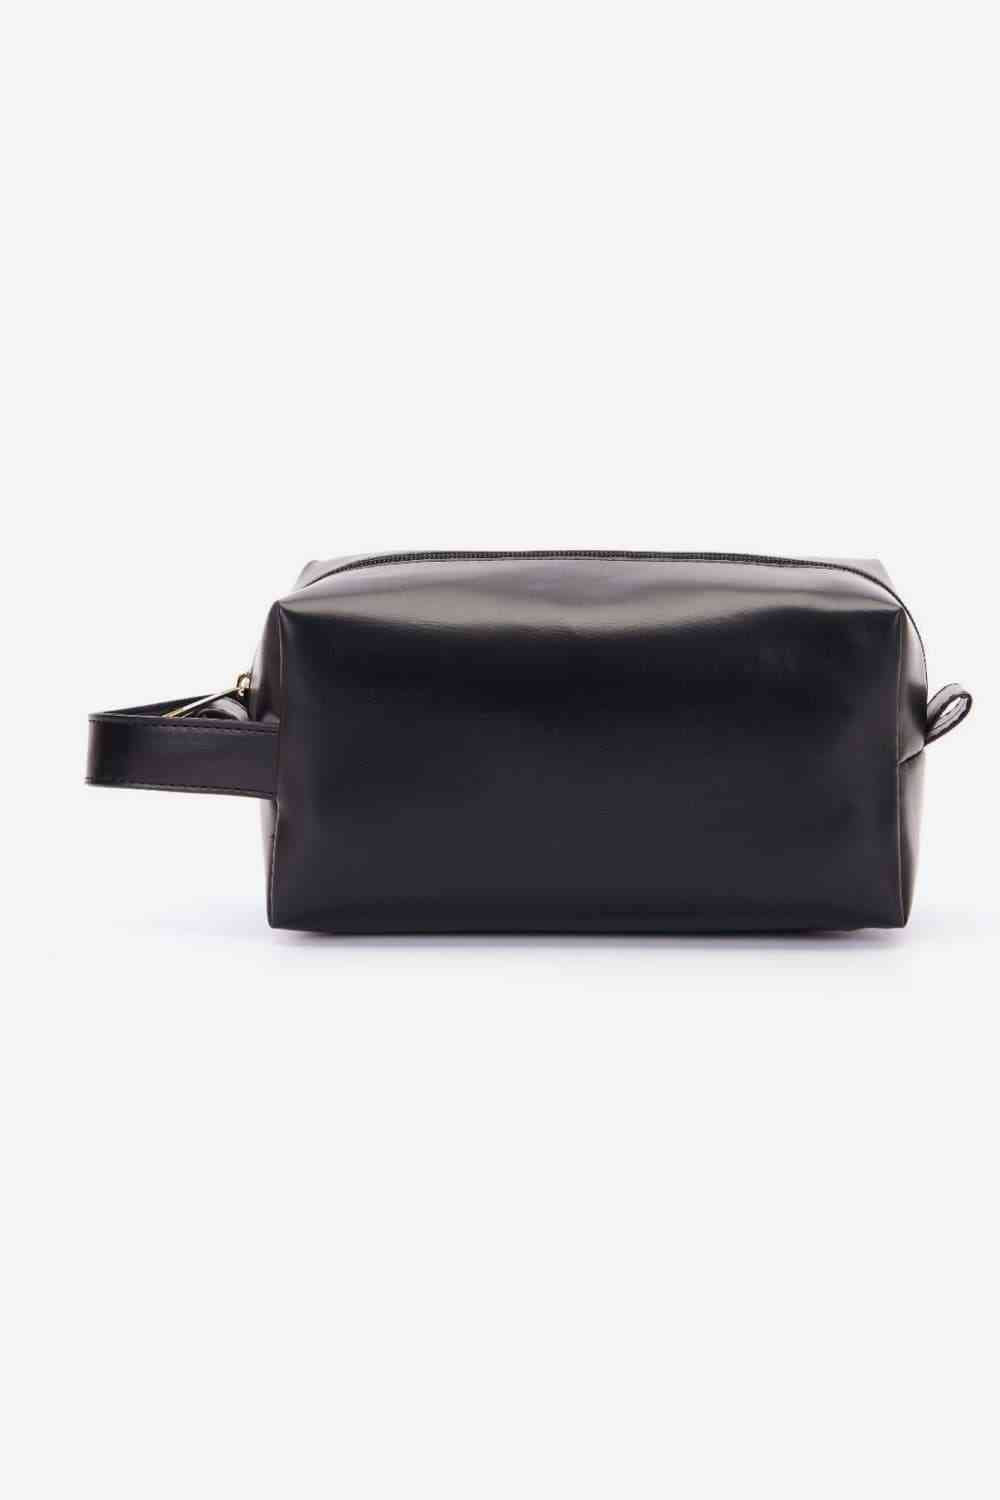 PU Leather Makeup Bag | BAGS & ACCESSORIES | Bags, Bags & Luggage, cosmetic bags, M@G, Ship From Overseas | Trendsi